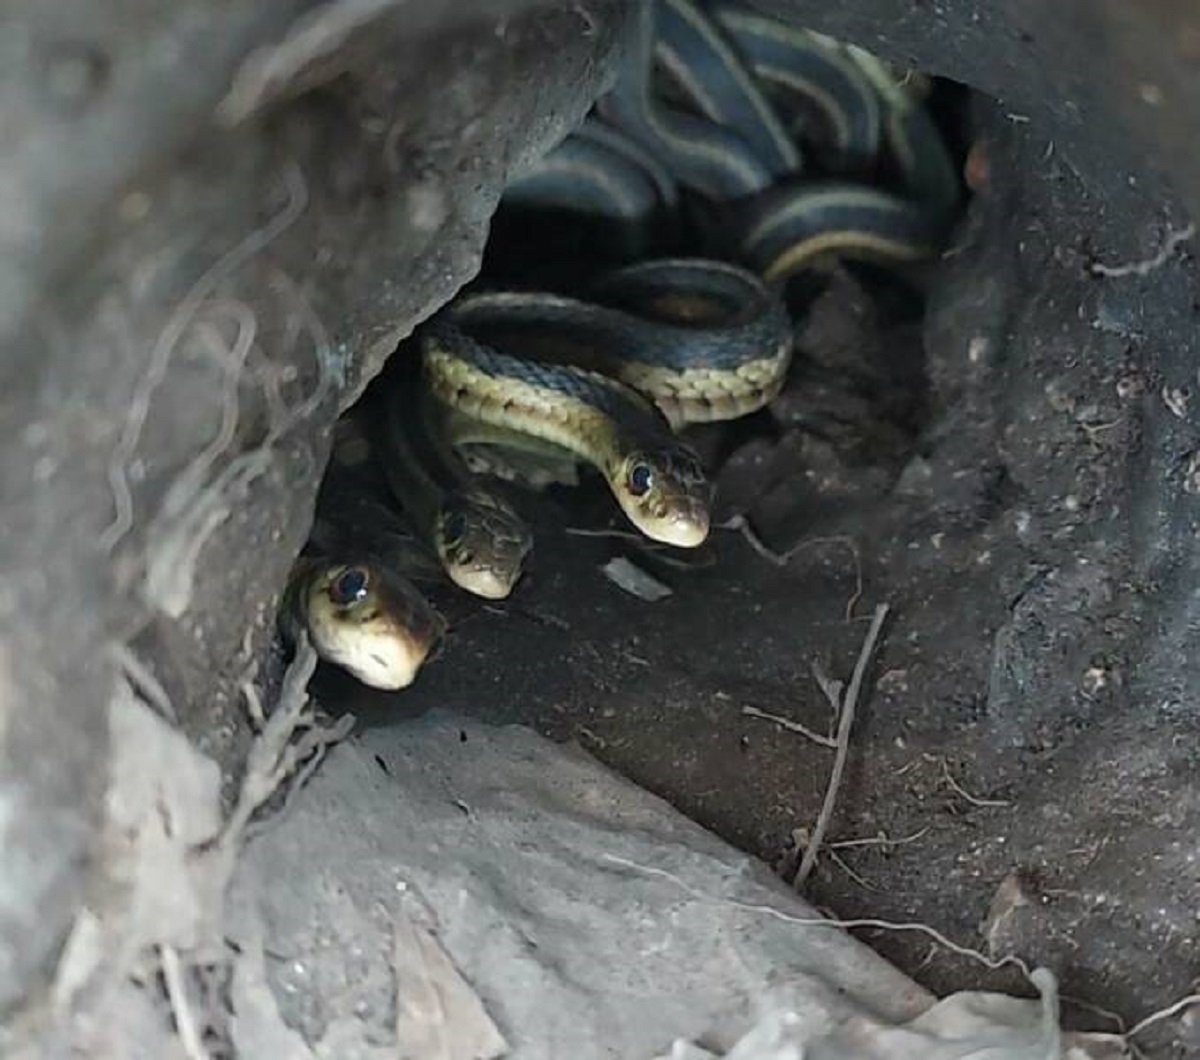 "Underground nest of garter snakes at a friend's house"